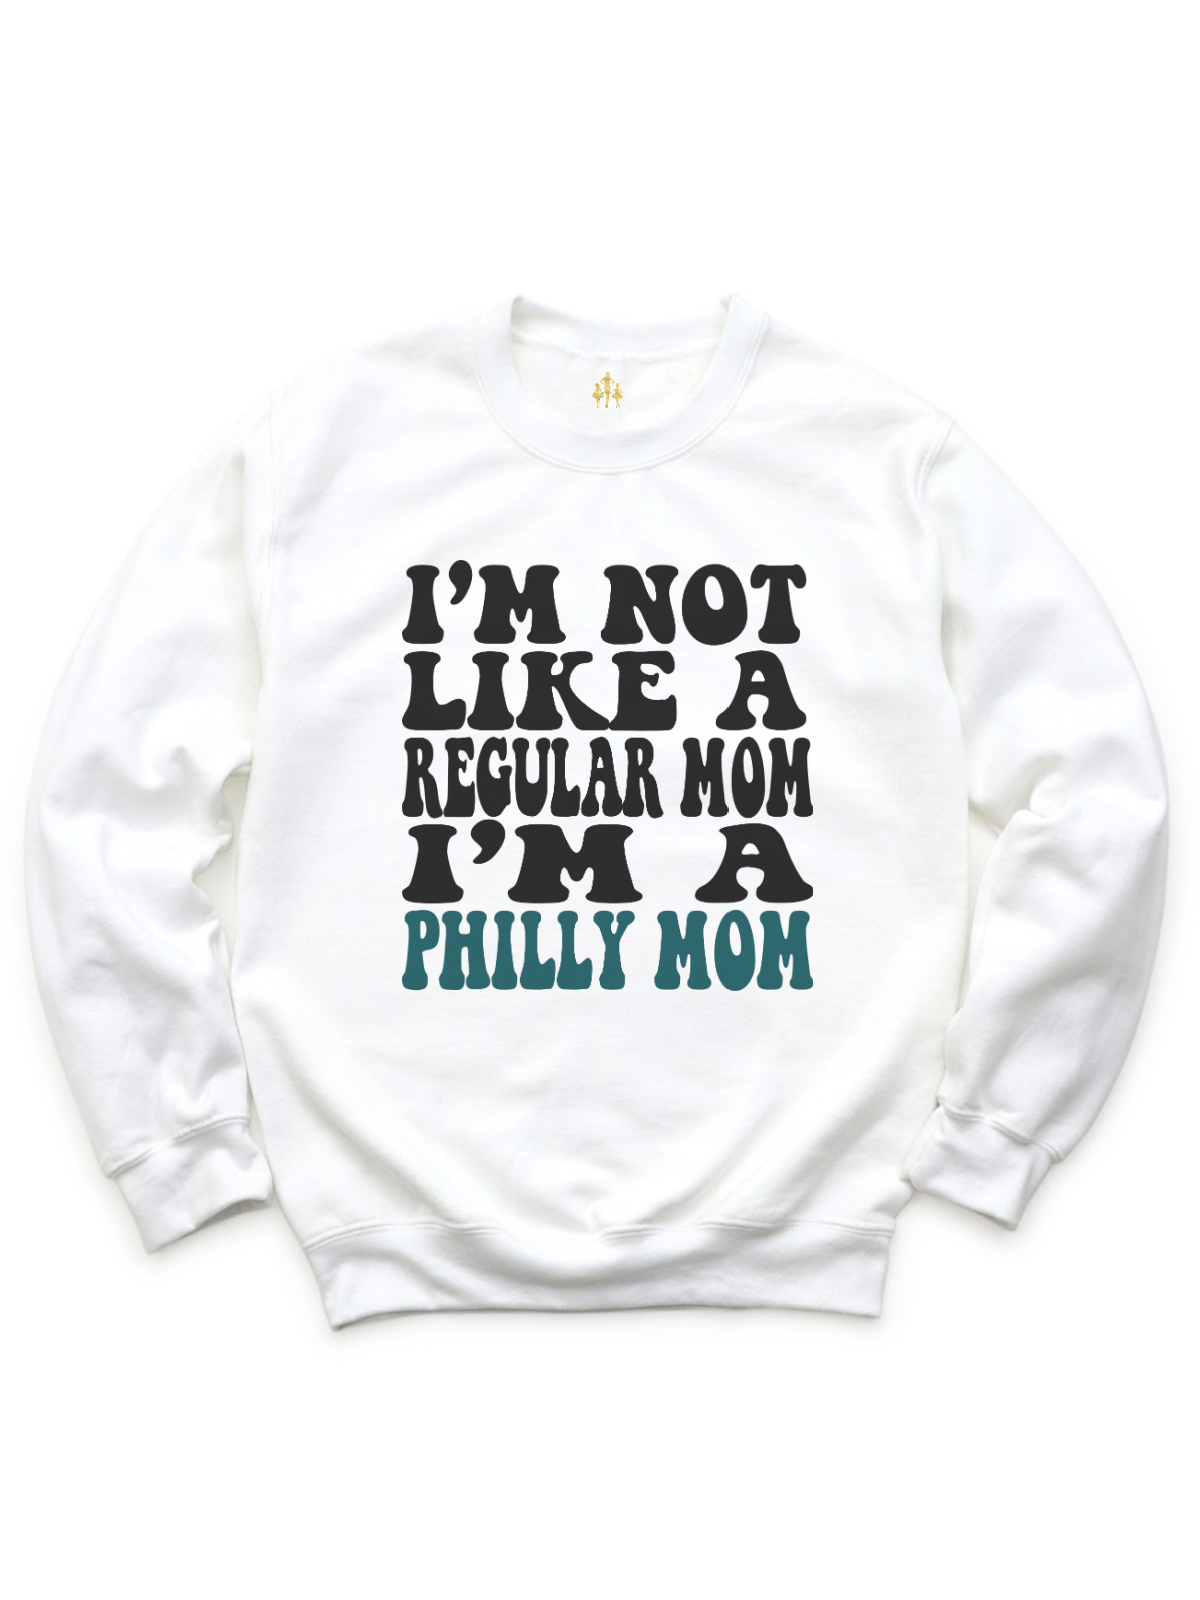 I'm Not like a Regular Mom, I'm a Philly Mom Adult Sweatshirt in White